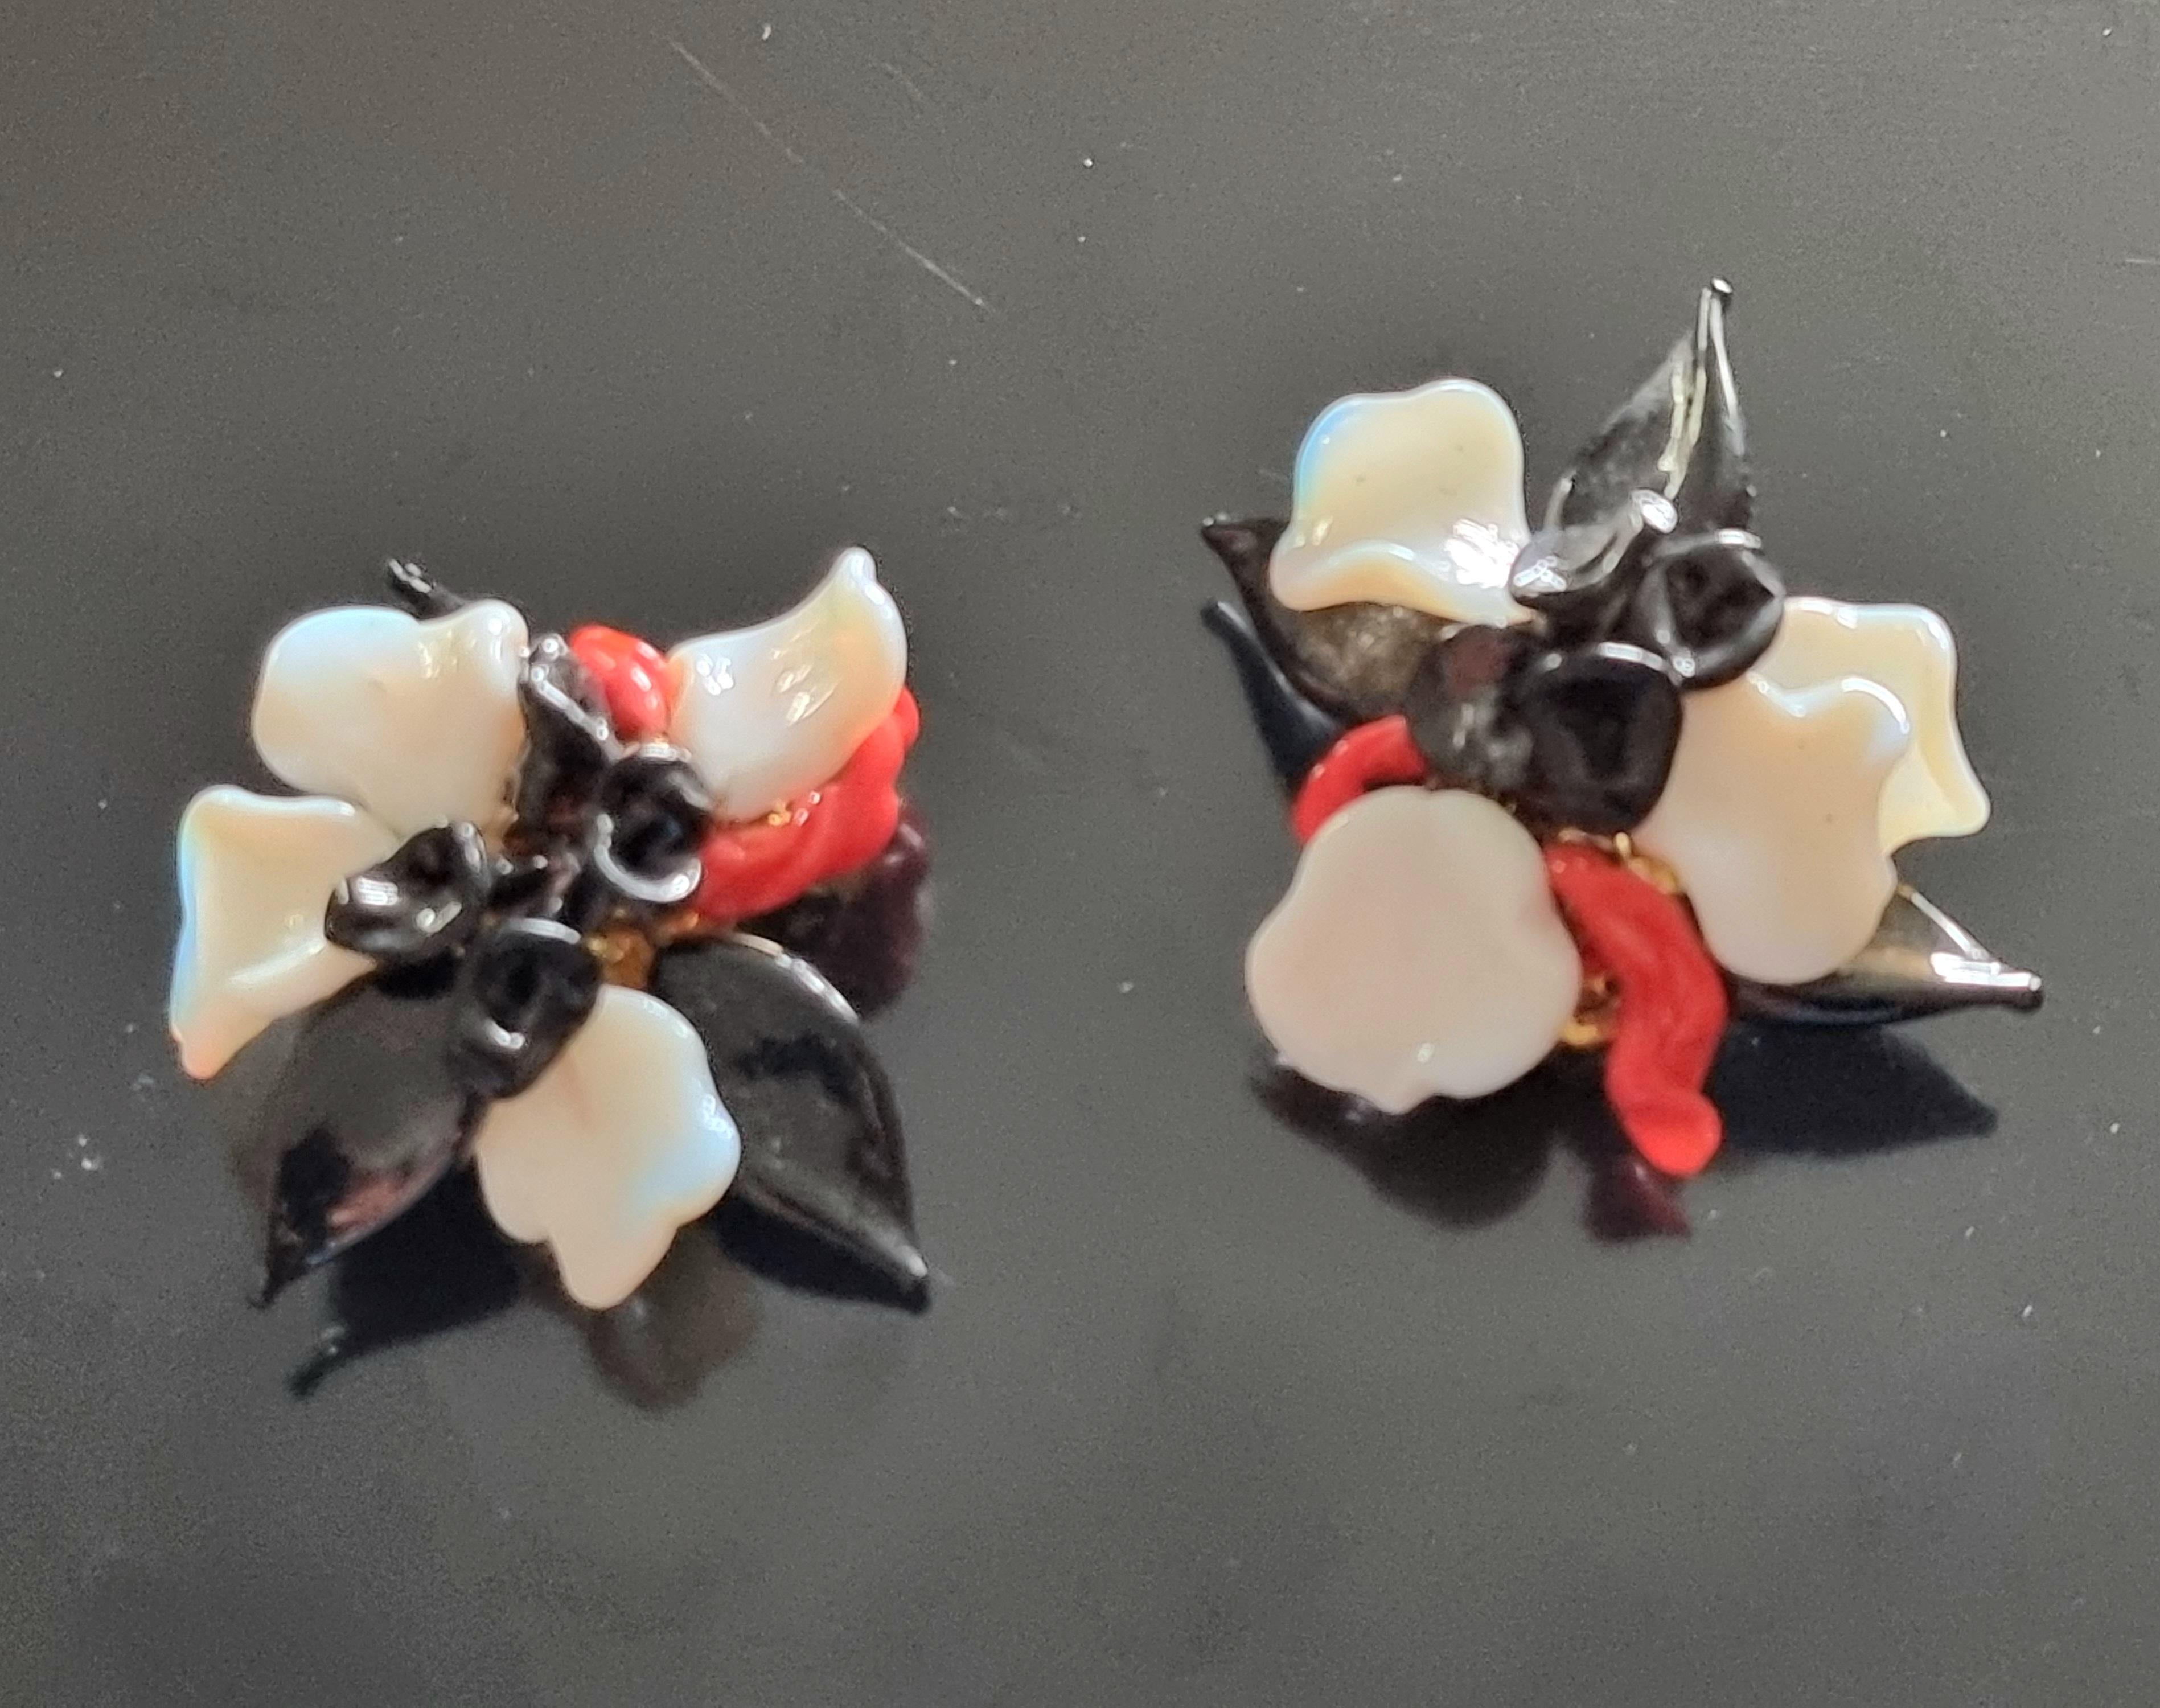 Sublime old EARRINGS with Clips,
60s vintage,
glass paste flower,
by famous French designer LOUIS ROUSSELET,
dimension 3,5 x 4 cm, weight 1 x 8 g,
very good state.


A child of Ménilmontant and the popular suburbs of Paris, Louis Rousselet was born